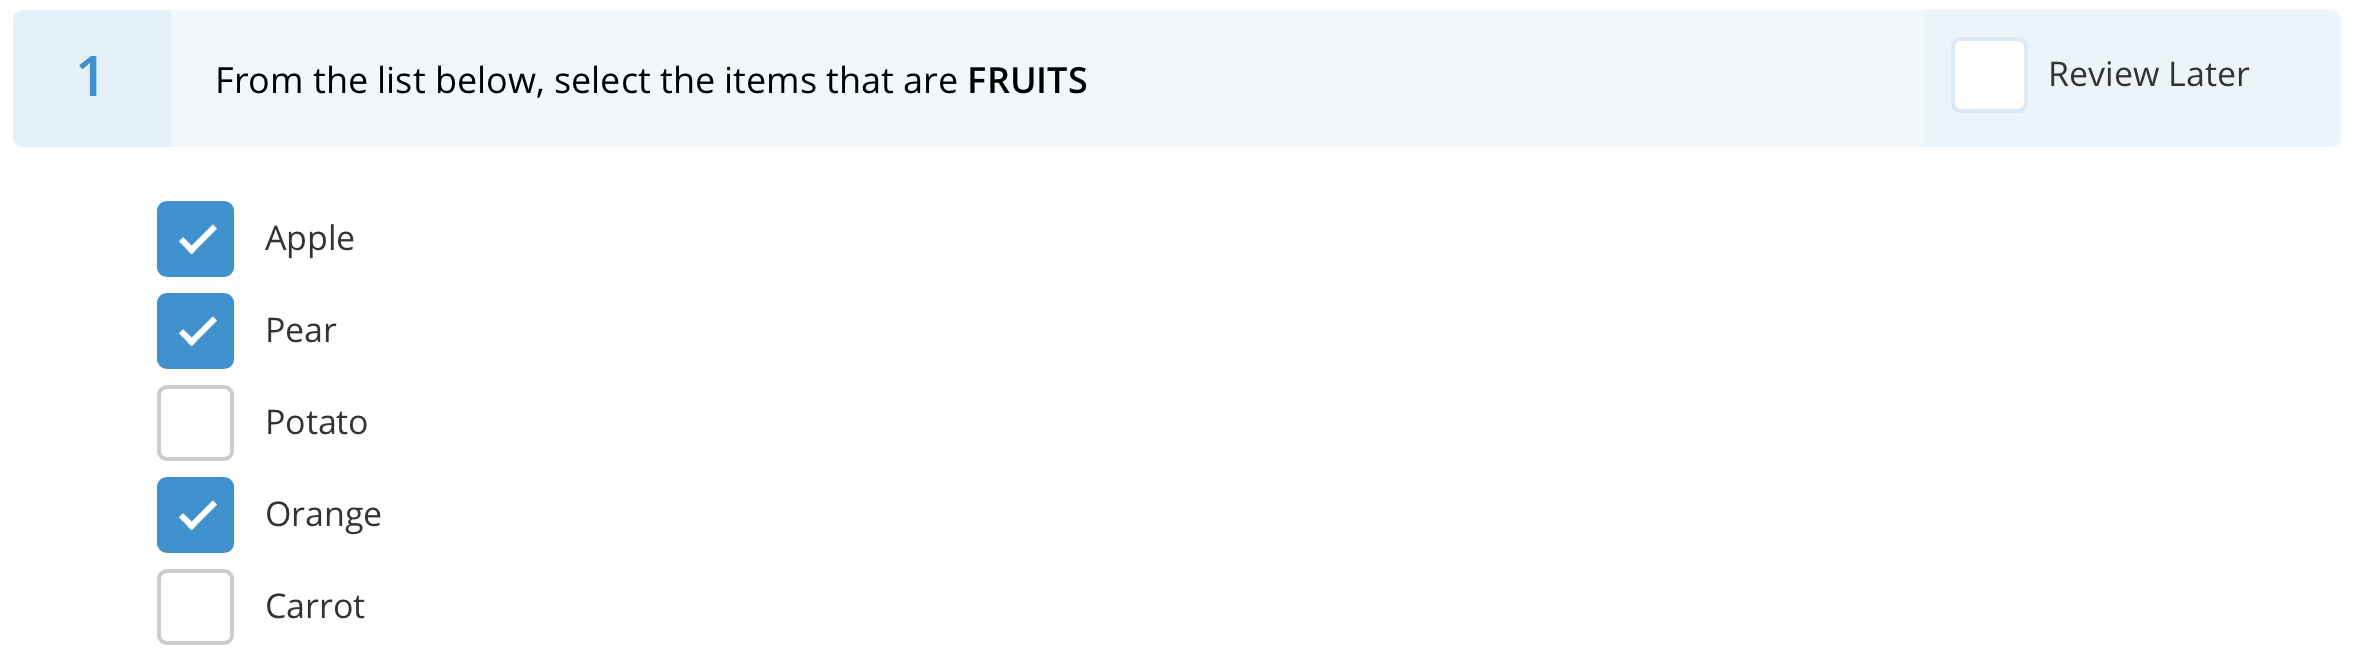 Multiple Select Sample Question - Select Fruits